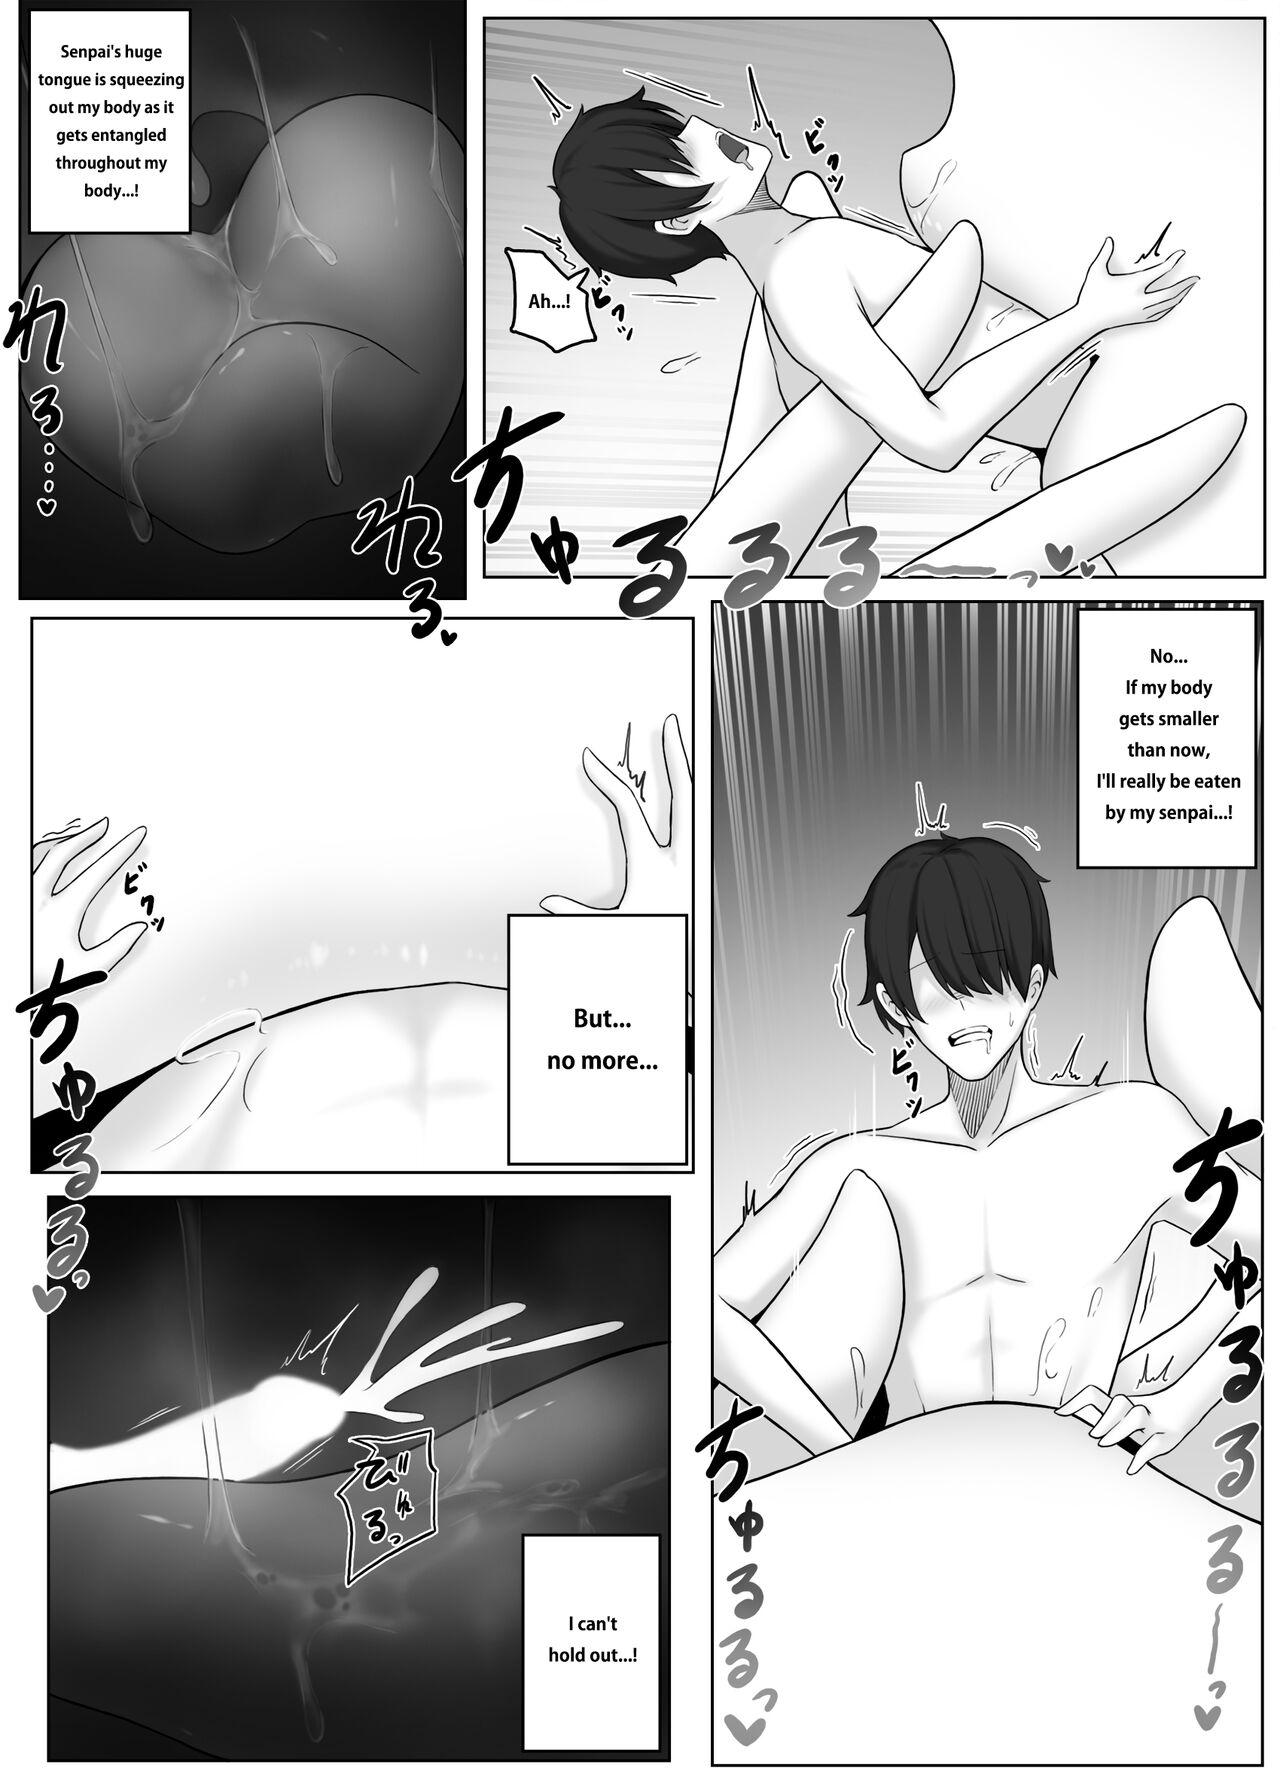 Toy Succubus House Gaydudes - Page 9